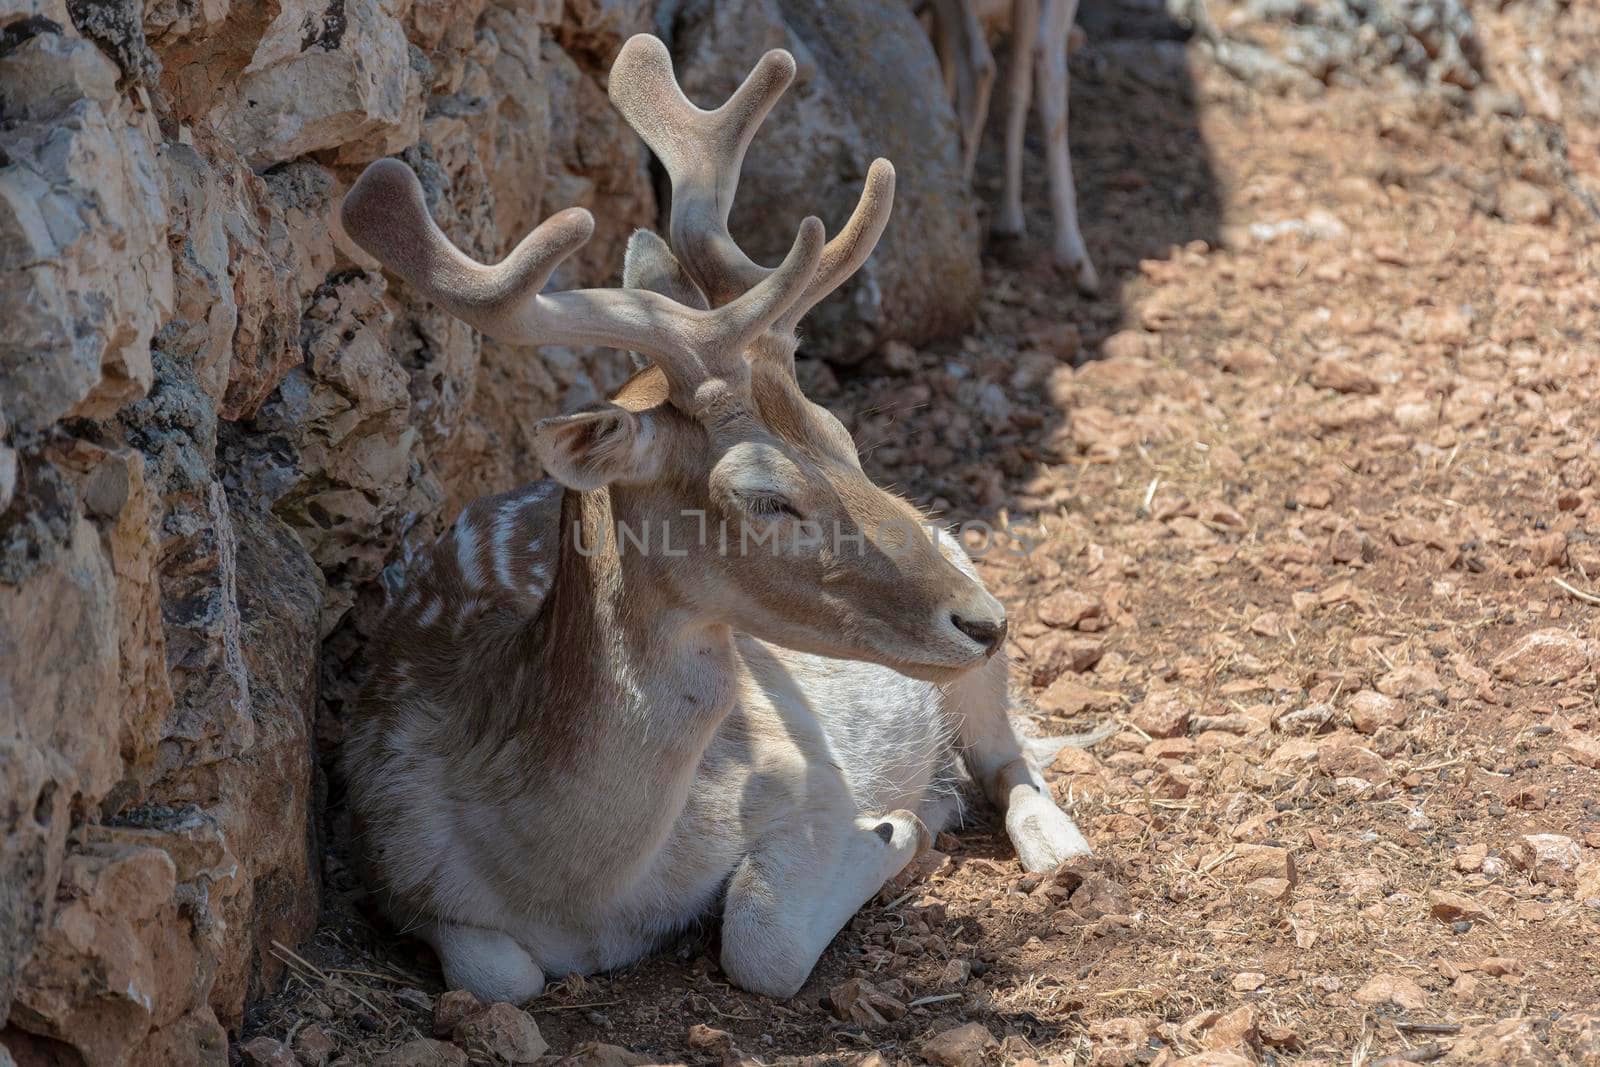 Wildlife. The deer is lying near a stone wall. Stock photography